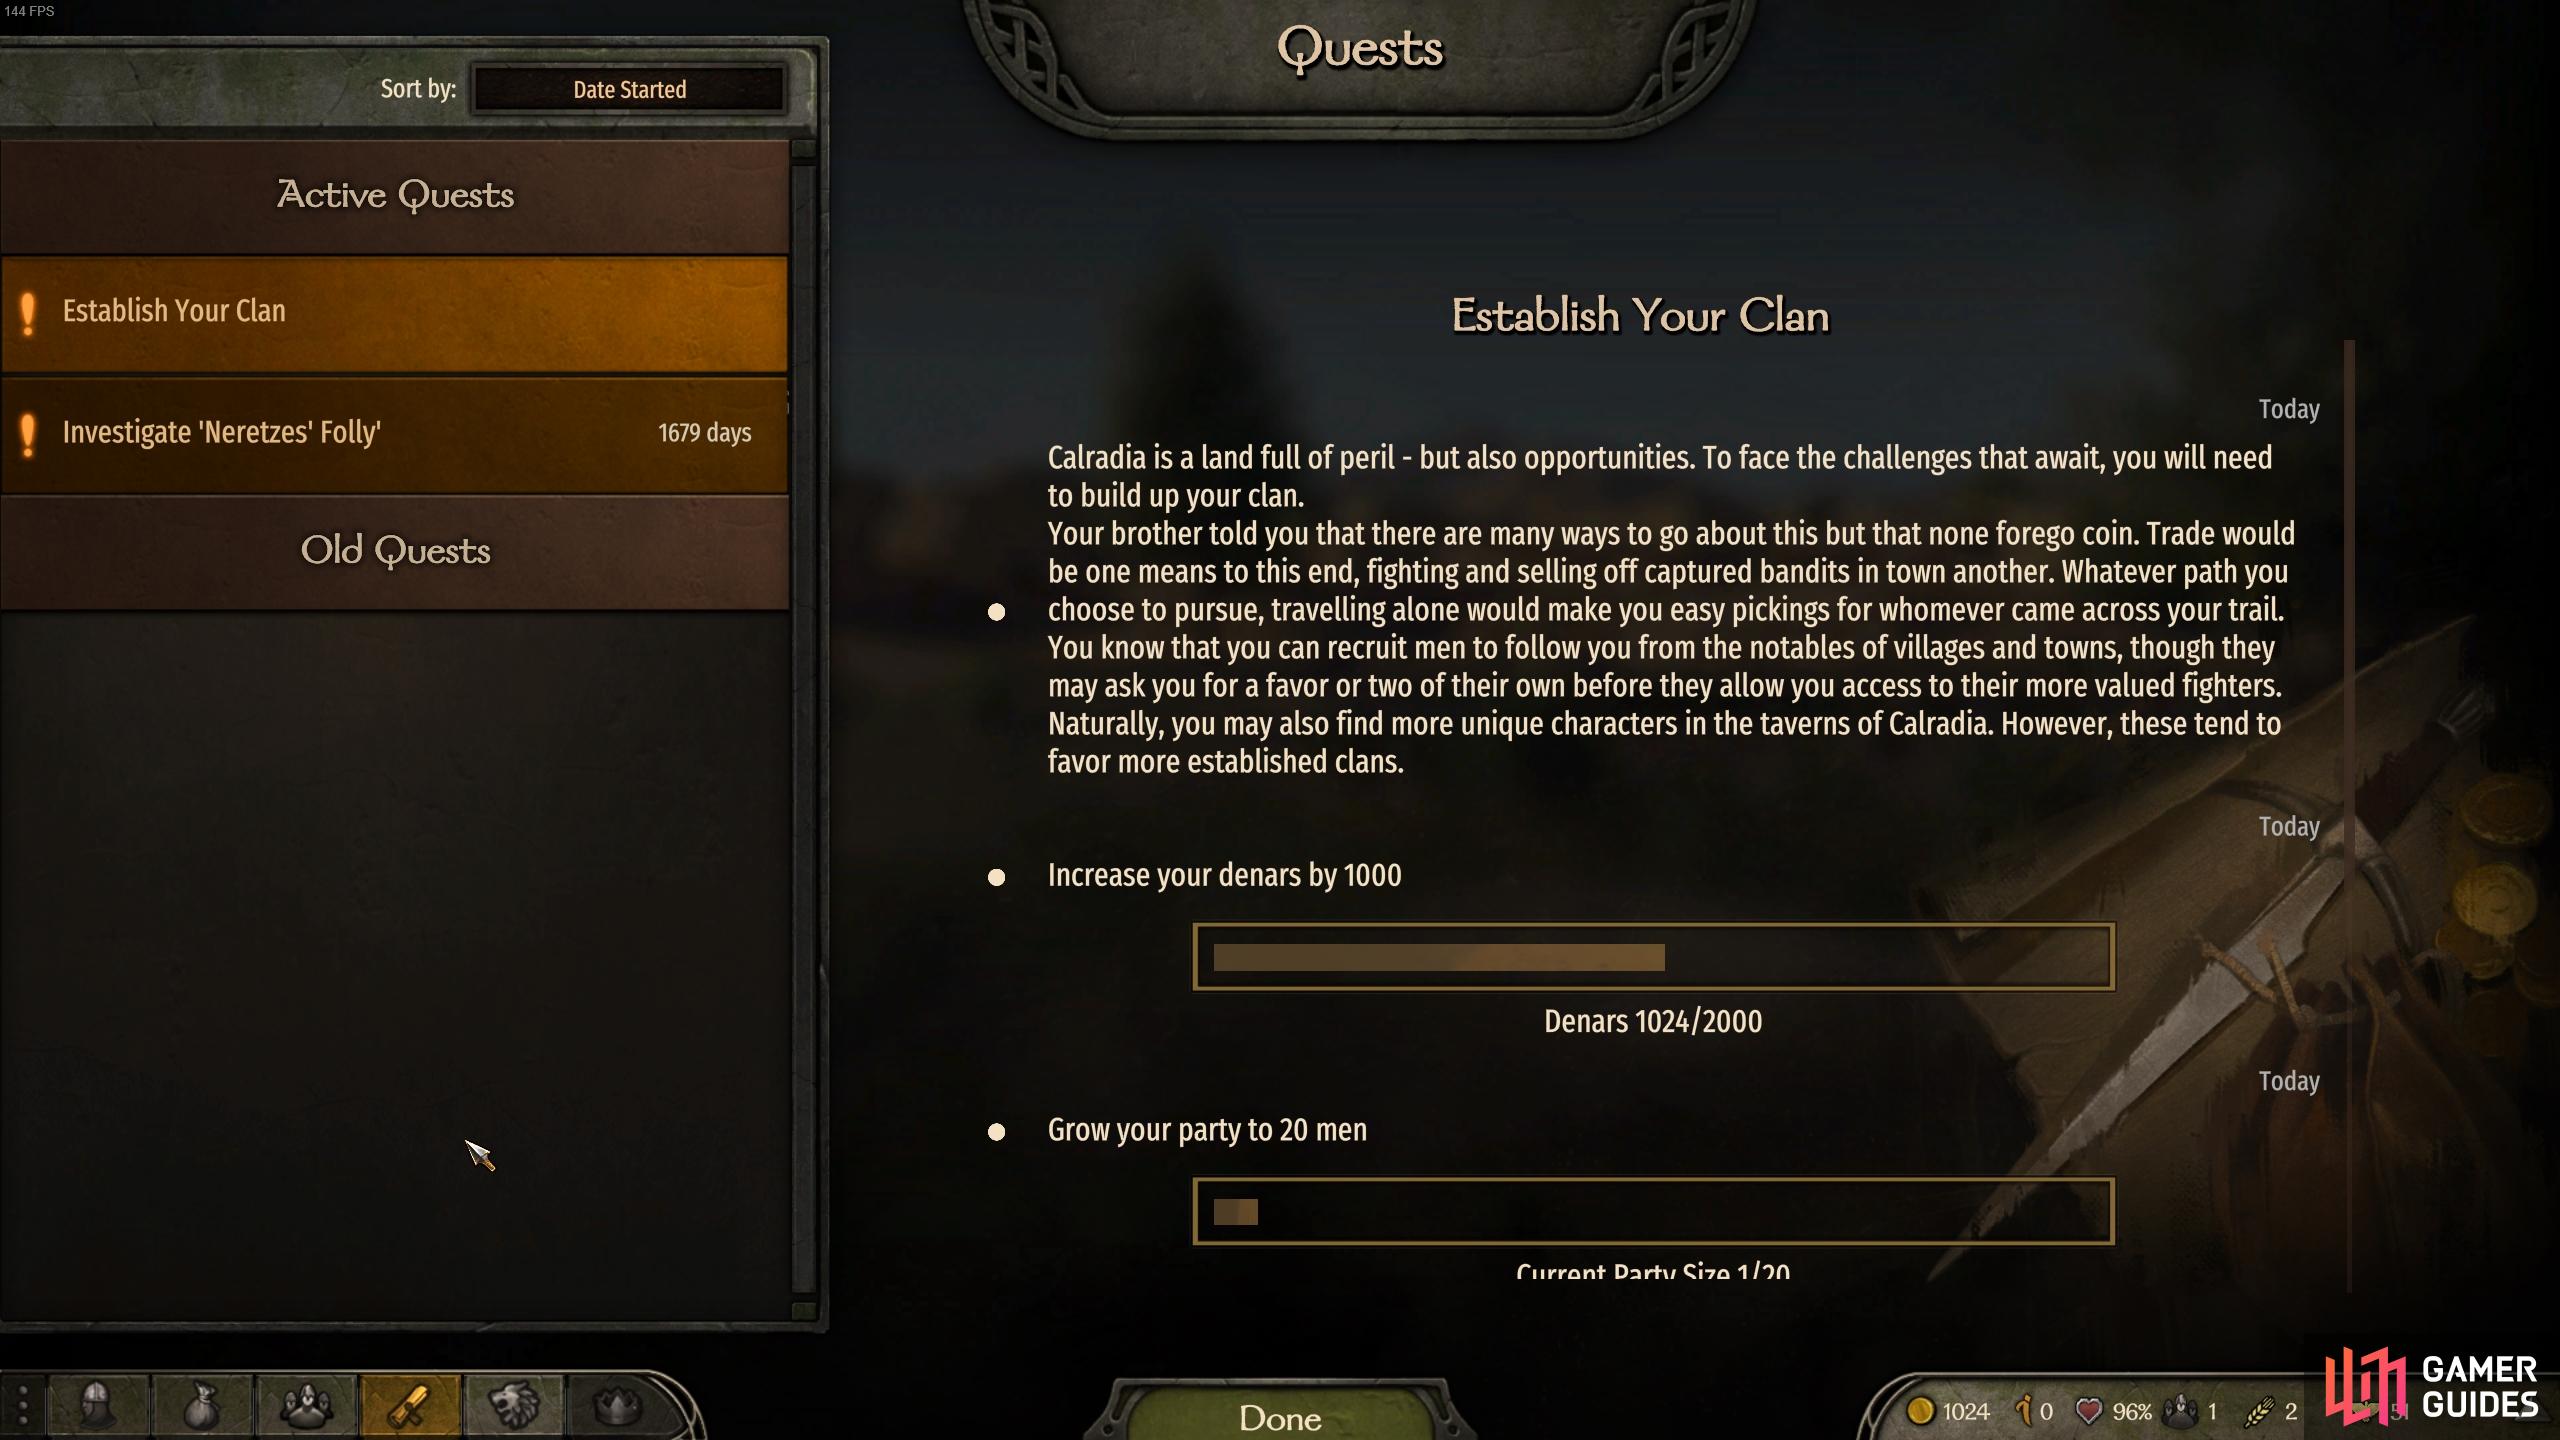 One of the first quests you encounter will encourage you to build your clan.